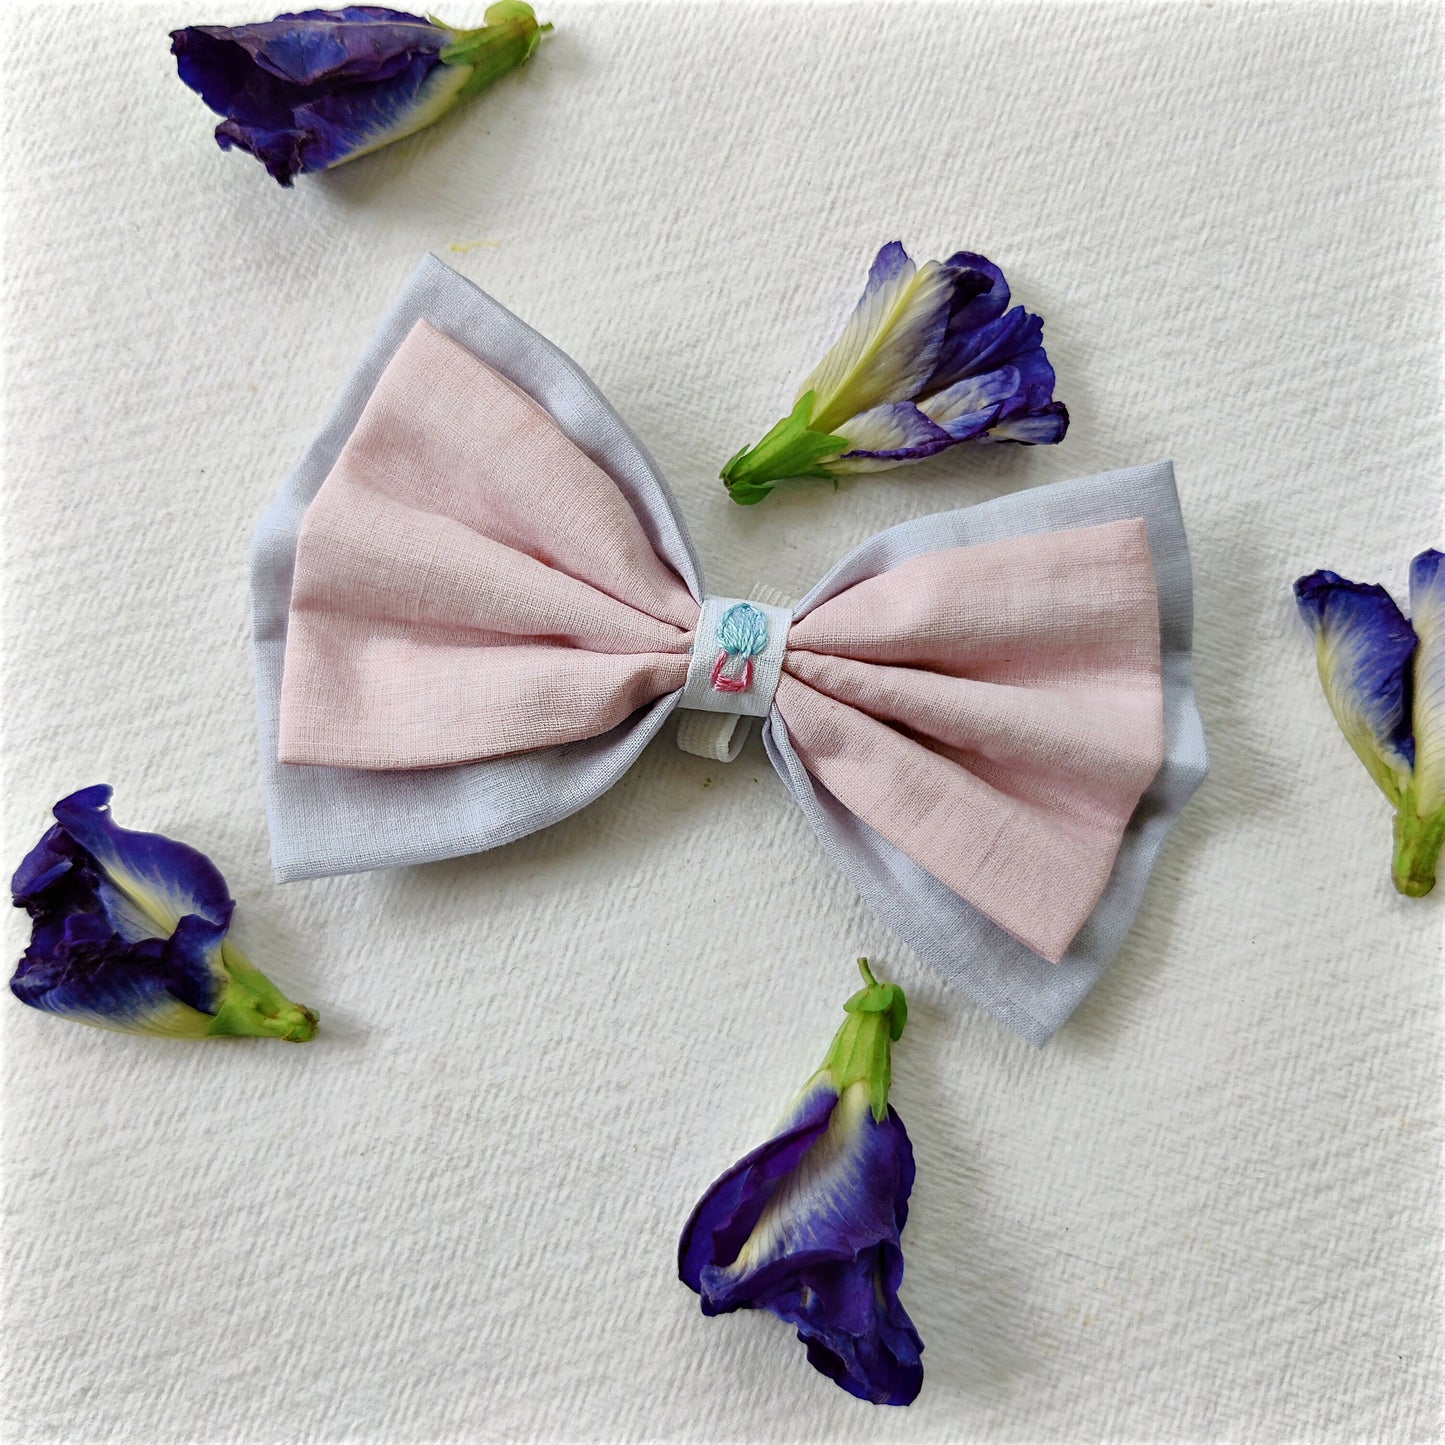 COTTON CANDY DREAM - Plant Dyed Handmade Pet Bow